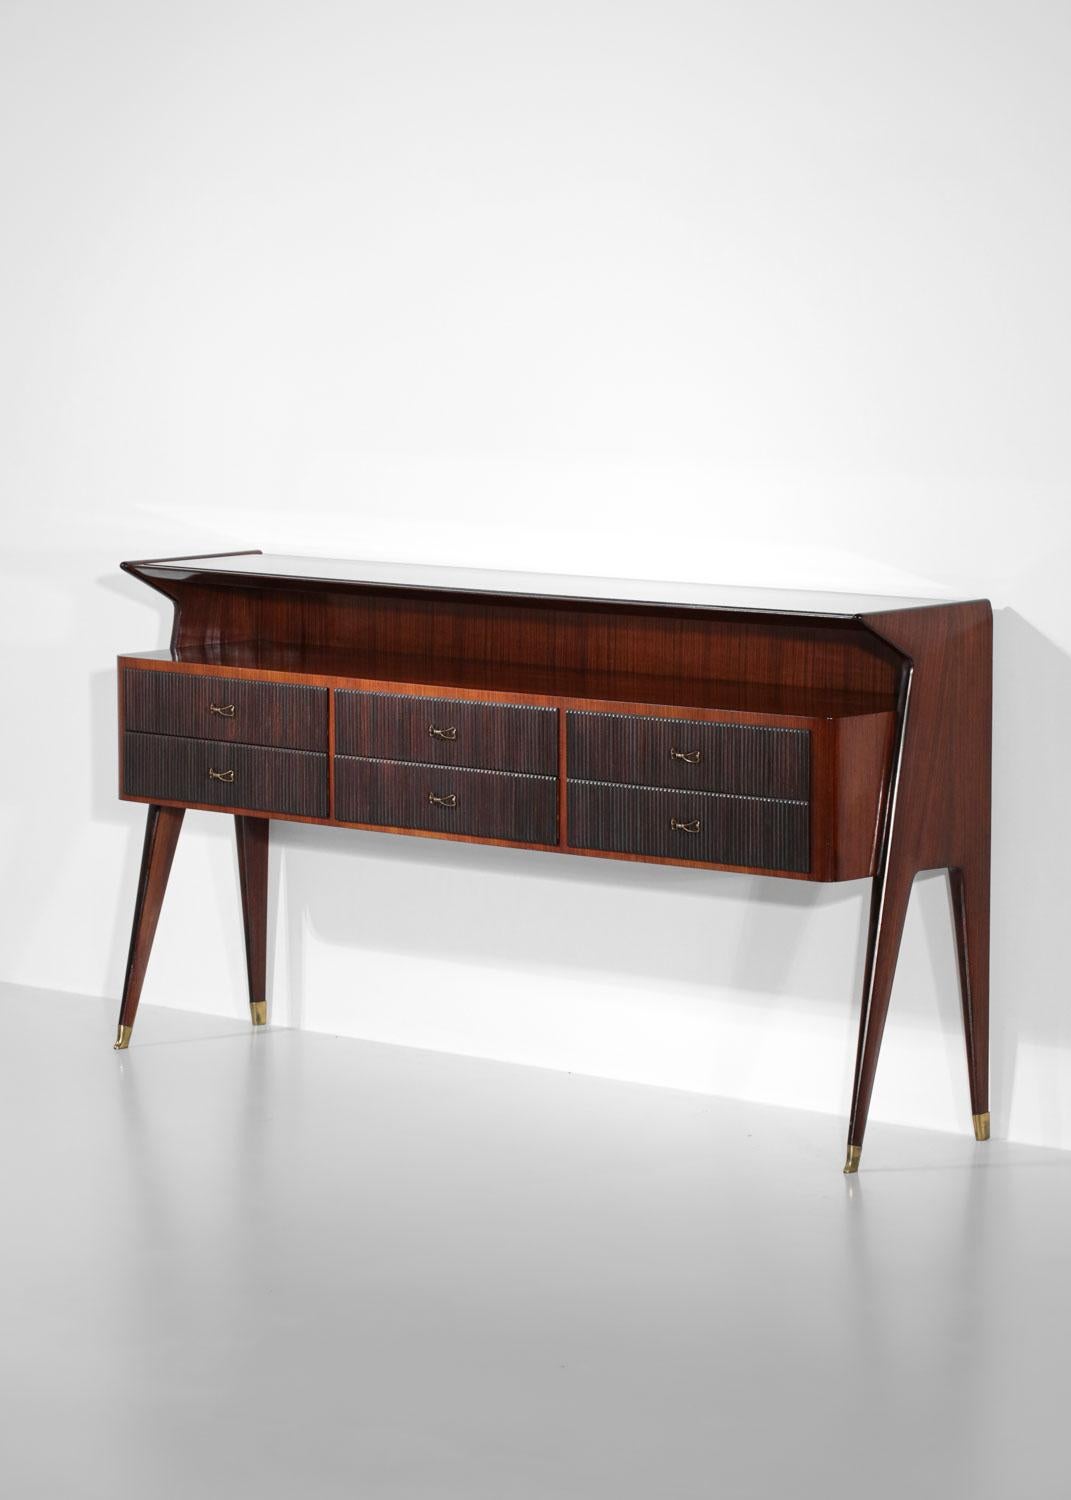 Italian sideboard or console from the 60s by the designer Vittorio Dassi. Structure in solid wood, top in glass slab 1.2 cm thick. This enfilade is composed of six drawers distributed along the furniture, finishing the legs with solid brass. Very